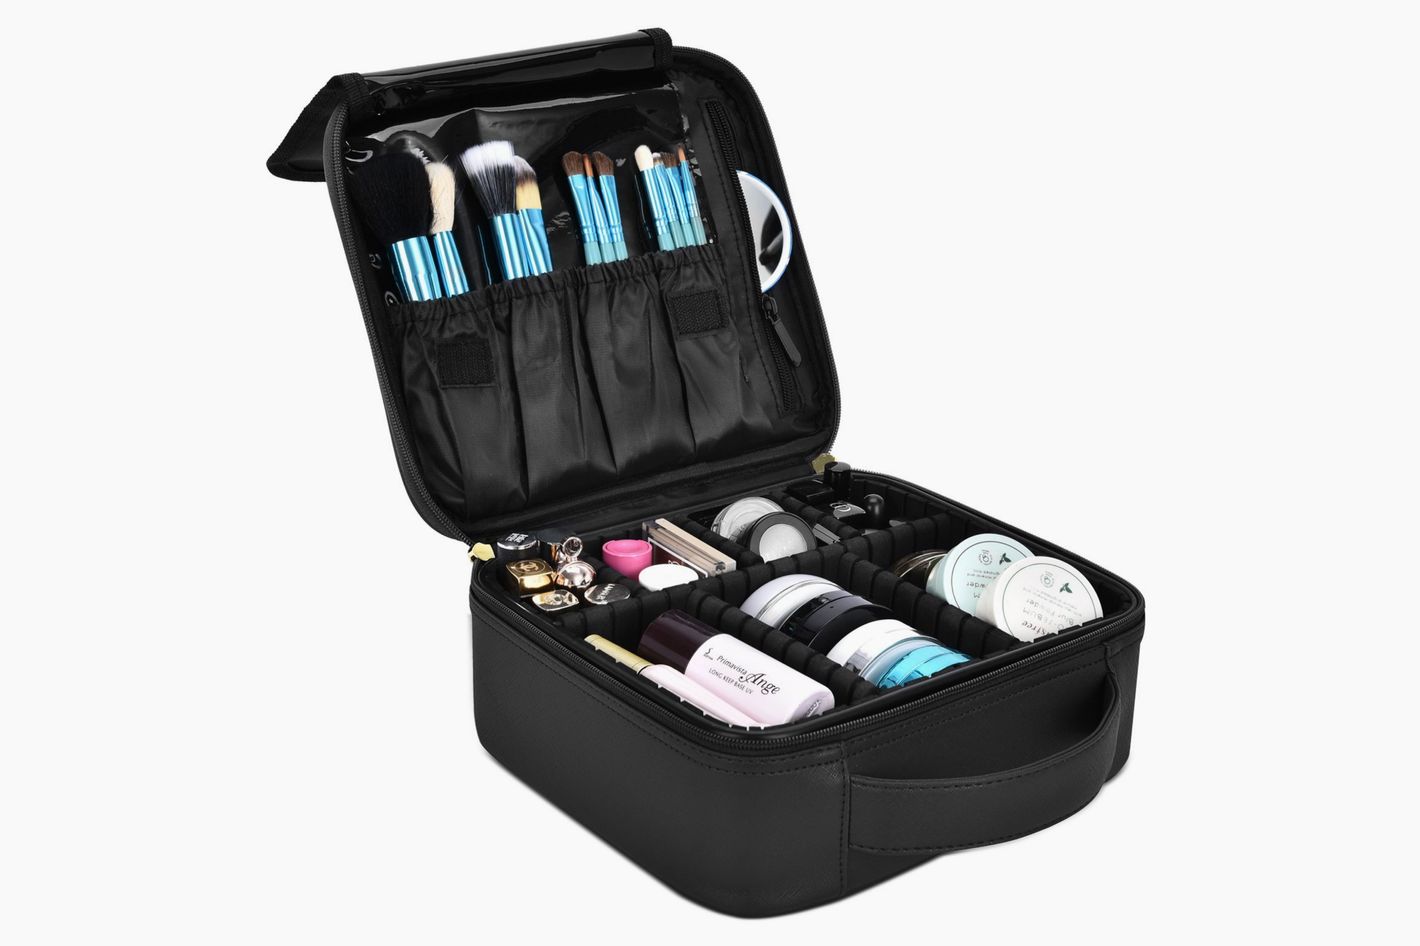 The 10 Best Makeup Bags for Makeup & Cosmetics 20191420 x 946